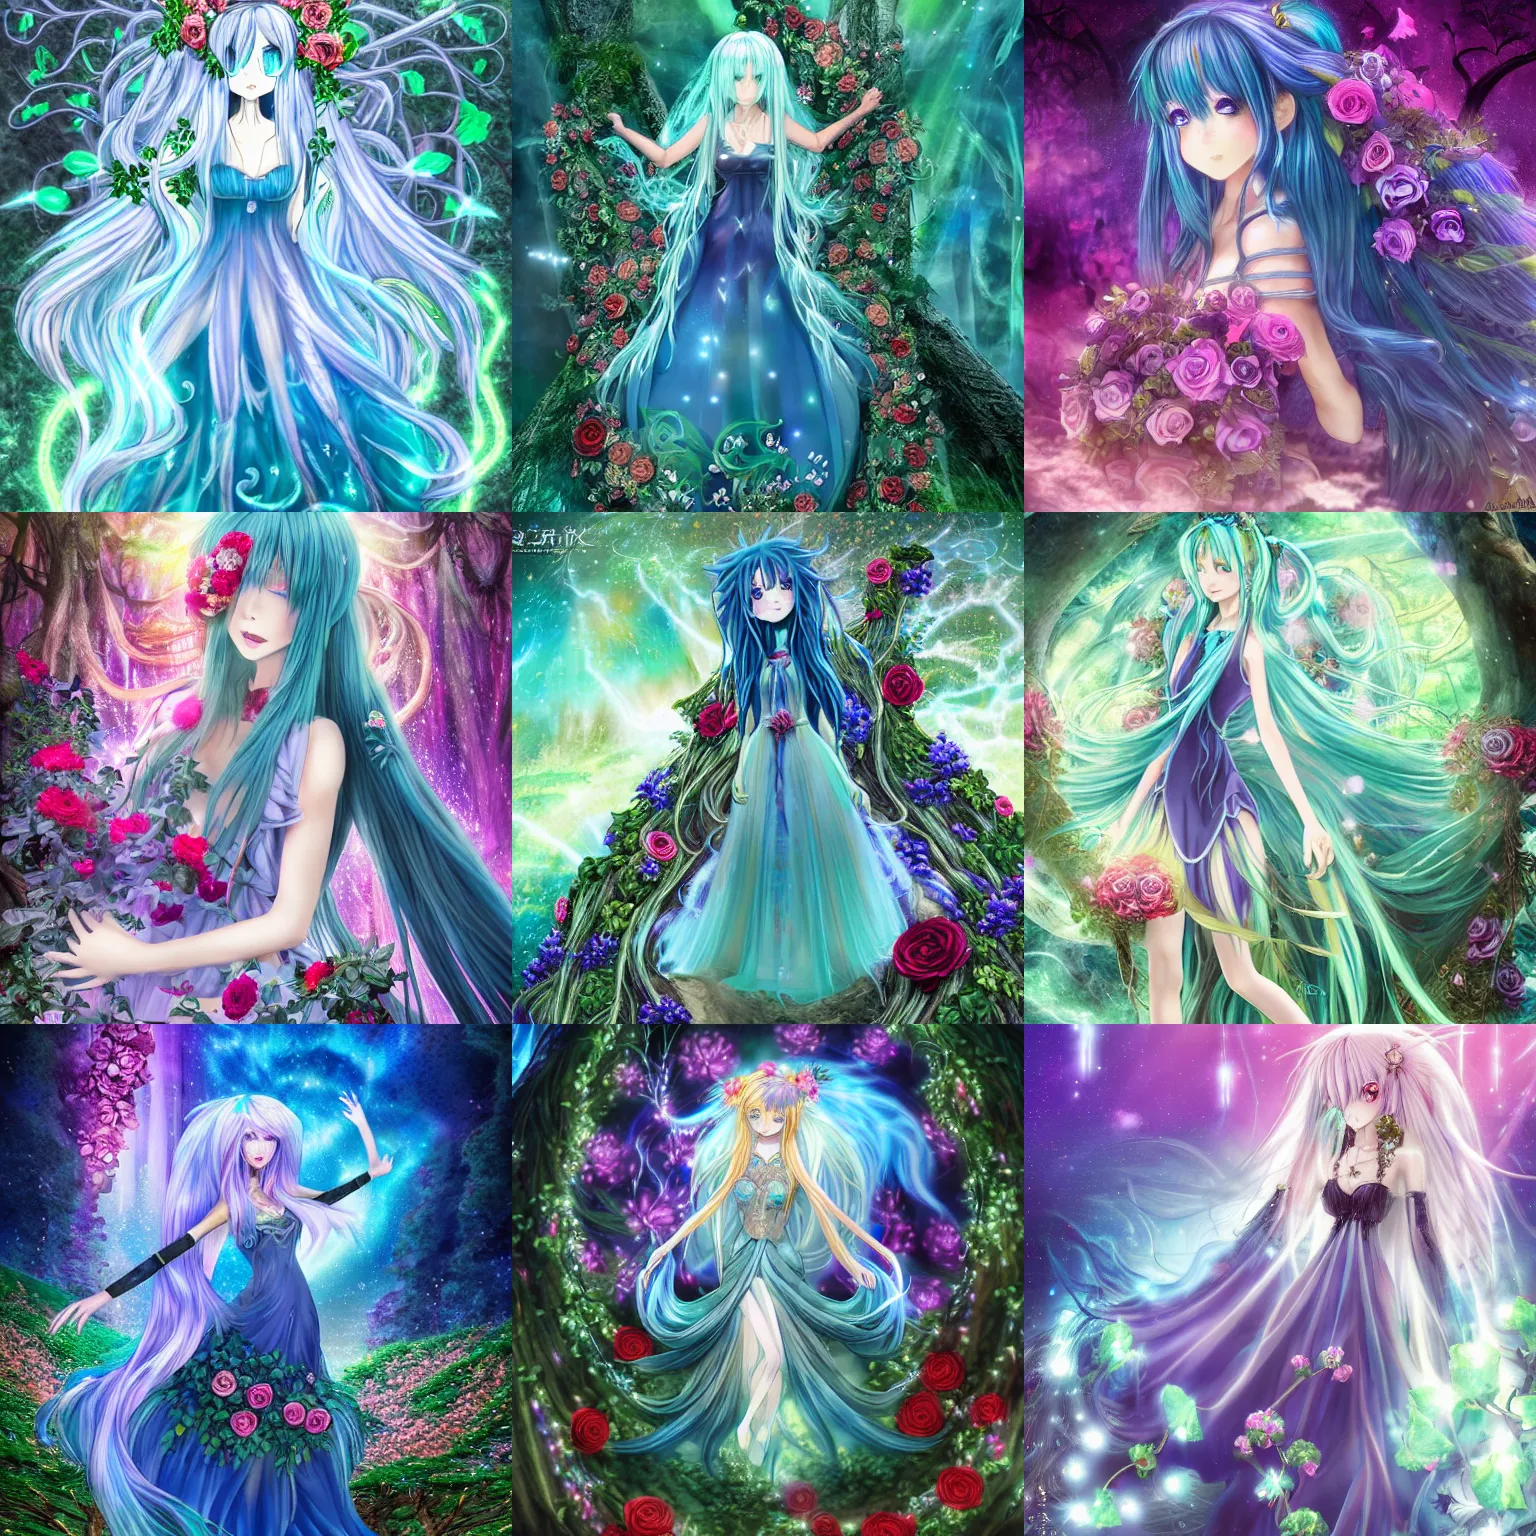 Image similar to 3 d anime magical goddess with long blue hair in a dress made of ivy and roses in a mythical forest, aurora borealis, roger magrini, leticia gillett, skeeva, nika maisuradze, billelis, christian behrendt, zigor samaniego, joannie leblanc